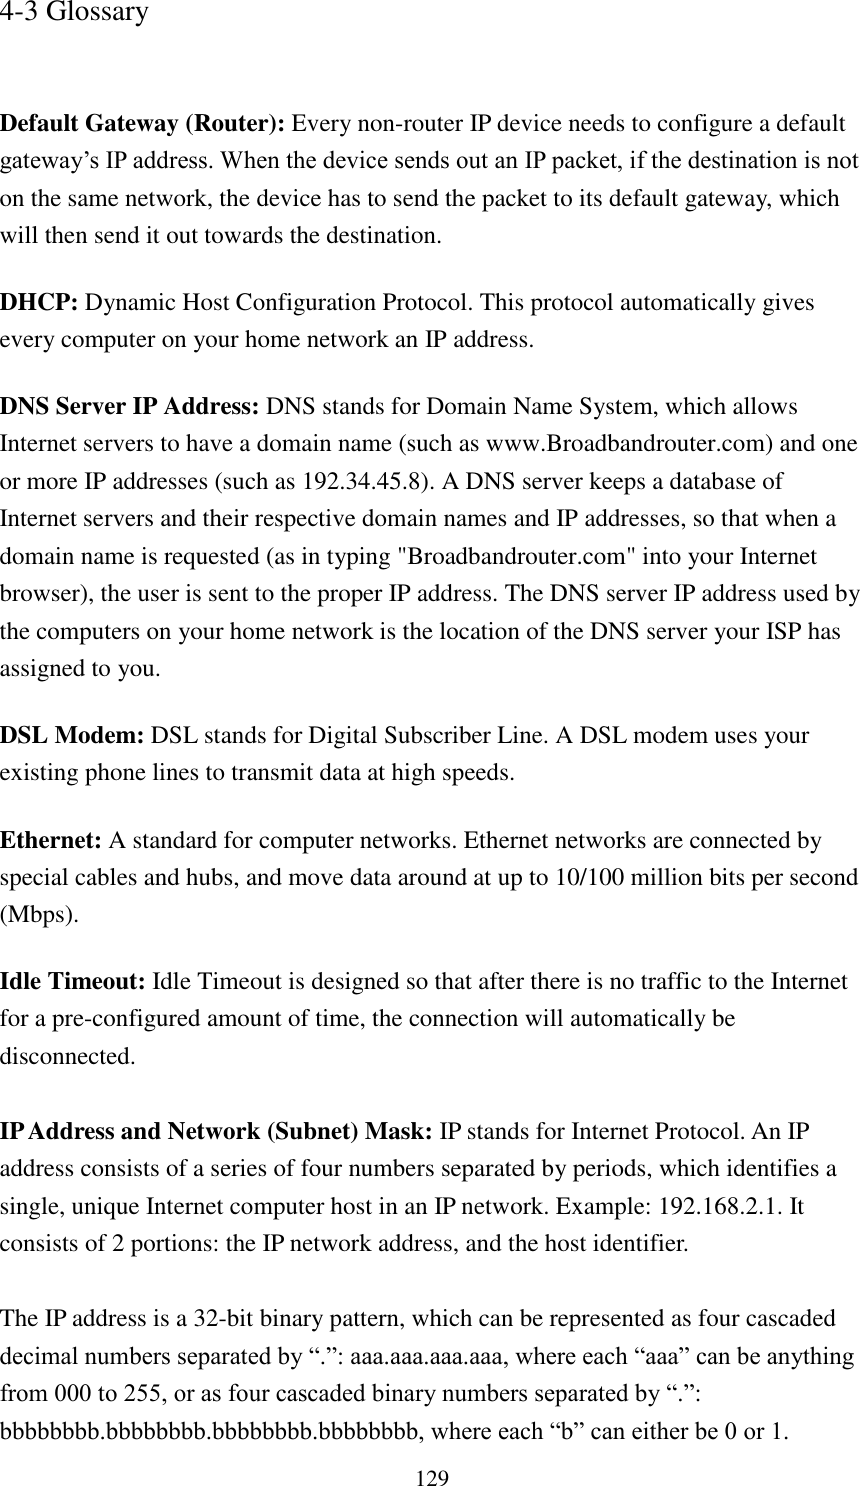 129 4-3 Glossary   Default Gateway (Router): Every non-router IP device needs to configure a default gateway‟s IP address. When the device sends out an IP packet, if the destination is not on the same network, the device has to send the packet to its default gateway, which will then send it out towards the destination. DHCP: Dynamic Host Configuration Protocol. This protocol automatically gives every computer on your home network an IP address. DNS Server IP Address: DNS stands for Domain Name System, which allows Internet servers to have a domain name (such as www.Broadbandrouter.com) and one or more IP addresses (such as 192.34.45.8). A DNS server keeps a database of Internet servers and their respective domain names and IP addresses, so that when a domain name is requested (as in typing &quot;Broadbandrouter.com&quot; into your Internet browser), the user is sent to the proper IP address. The DNS server IP address used by the computers on your home network is the location of the DNS server your ISP has assigned to you.   DSL Modem: DSL stands for Digital Subscriber Line. A DSL modem uses your existing phone lines to transmit data at high speeds.   Ethernet: A standard for computer networks. Ethernet networks are connected by special cables and hubs, and move data around at up to 10/100 million bits per second (Mbps).   Idle Timeout: Idle Timeout is designed so that after there is no traffic to the Internet for a pre-configured amount of time, the connection will automatically be disconnected.  IP Address and Network (Subnet) Mask: IP stands for Internet Protocol. An IP address consists of a series of four numbers separated by periods, which identifies a single, unique Internet computer host in an IP network. Example: 192.168.2.1. It consists of 2 portions: the IP network address, and the host identifier.  The IP address is a 32-bit binary pattern, which can be represented as four cascaded decimal numbers separated by “.”: aaa.aaa.aaa.aaa, where each “aaa” can be anything from 000 to 255, or as four cascaded binary numbers separated by “.”: bbbbbbbb.bbbbbbbb.bbbbbbbb.bbbbbbbb, where each “b” can either be 0 or 1. 